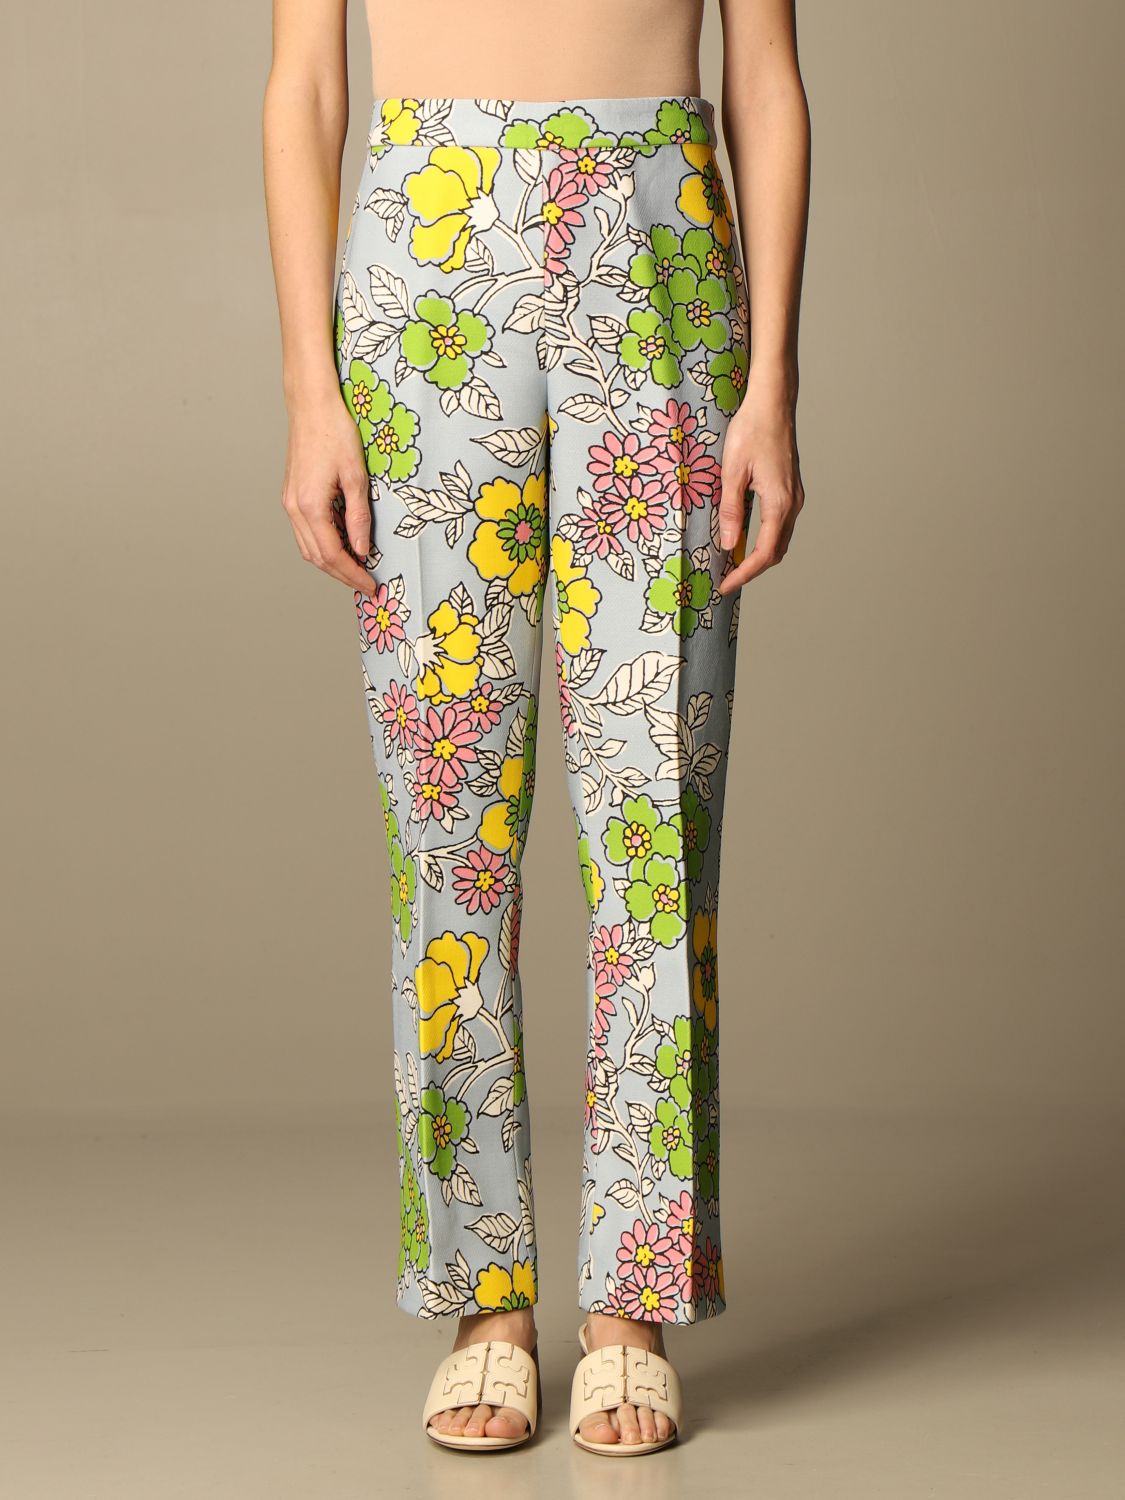 Tory Burch Trousers With Floral Pattern Pants Tory Burch Women Multicolor Pants Tory Burch 78863 Giglio En